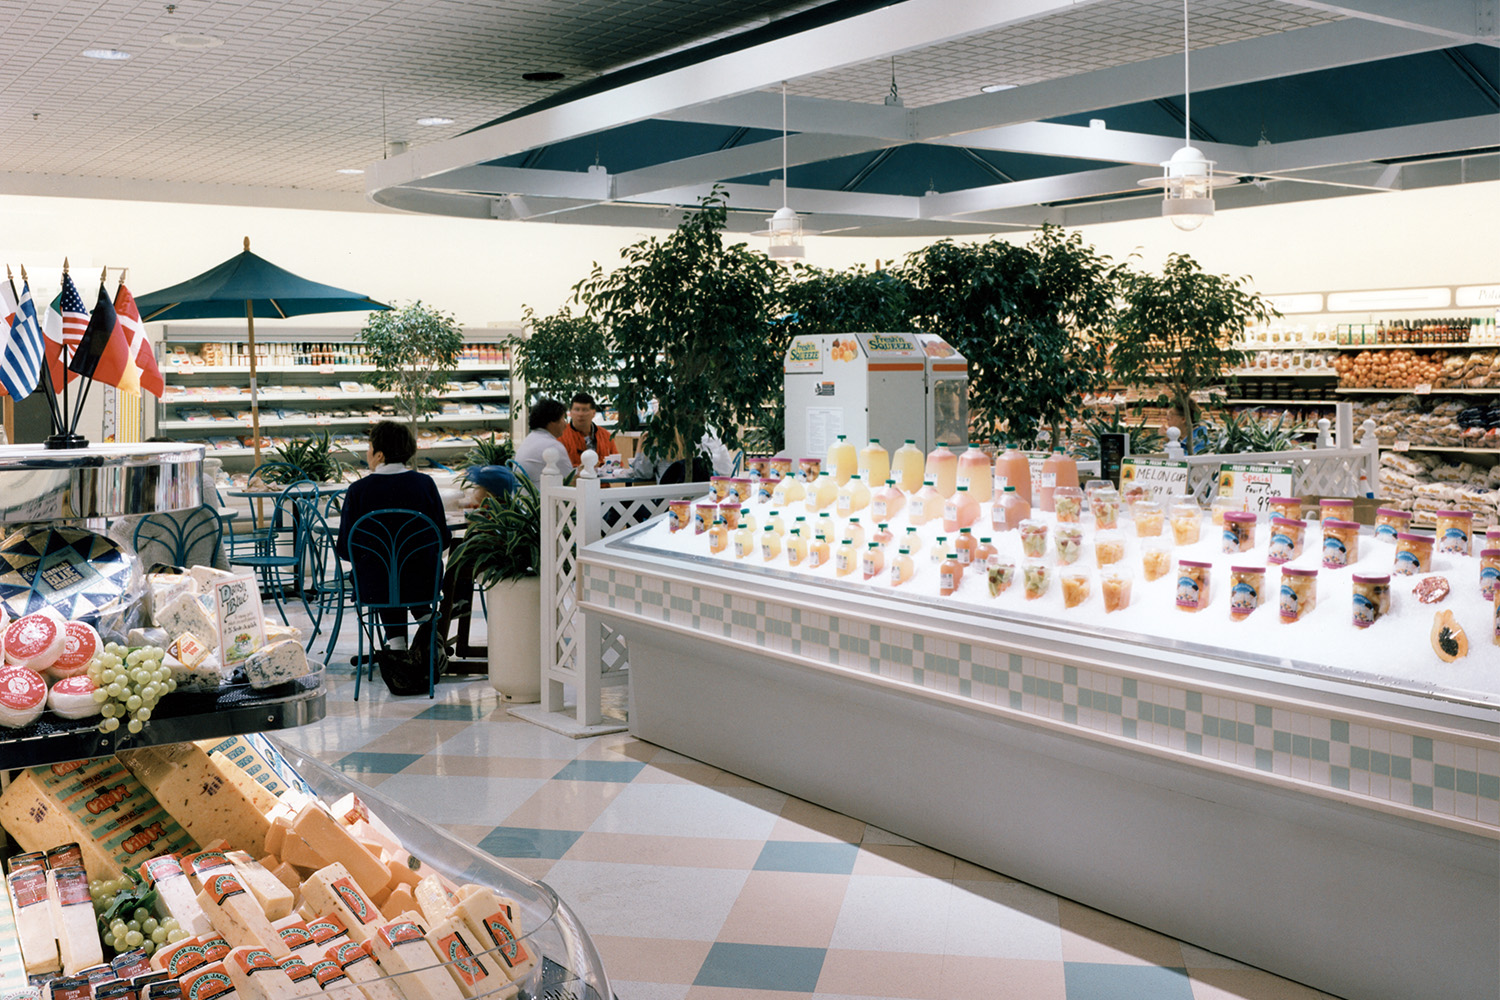 Section of grocery store with juices and fruits on ice to the right, and international cheese section to the left 